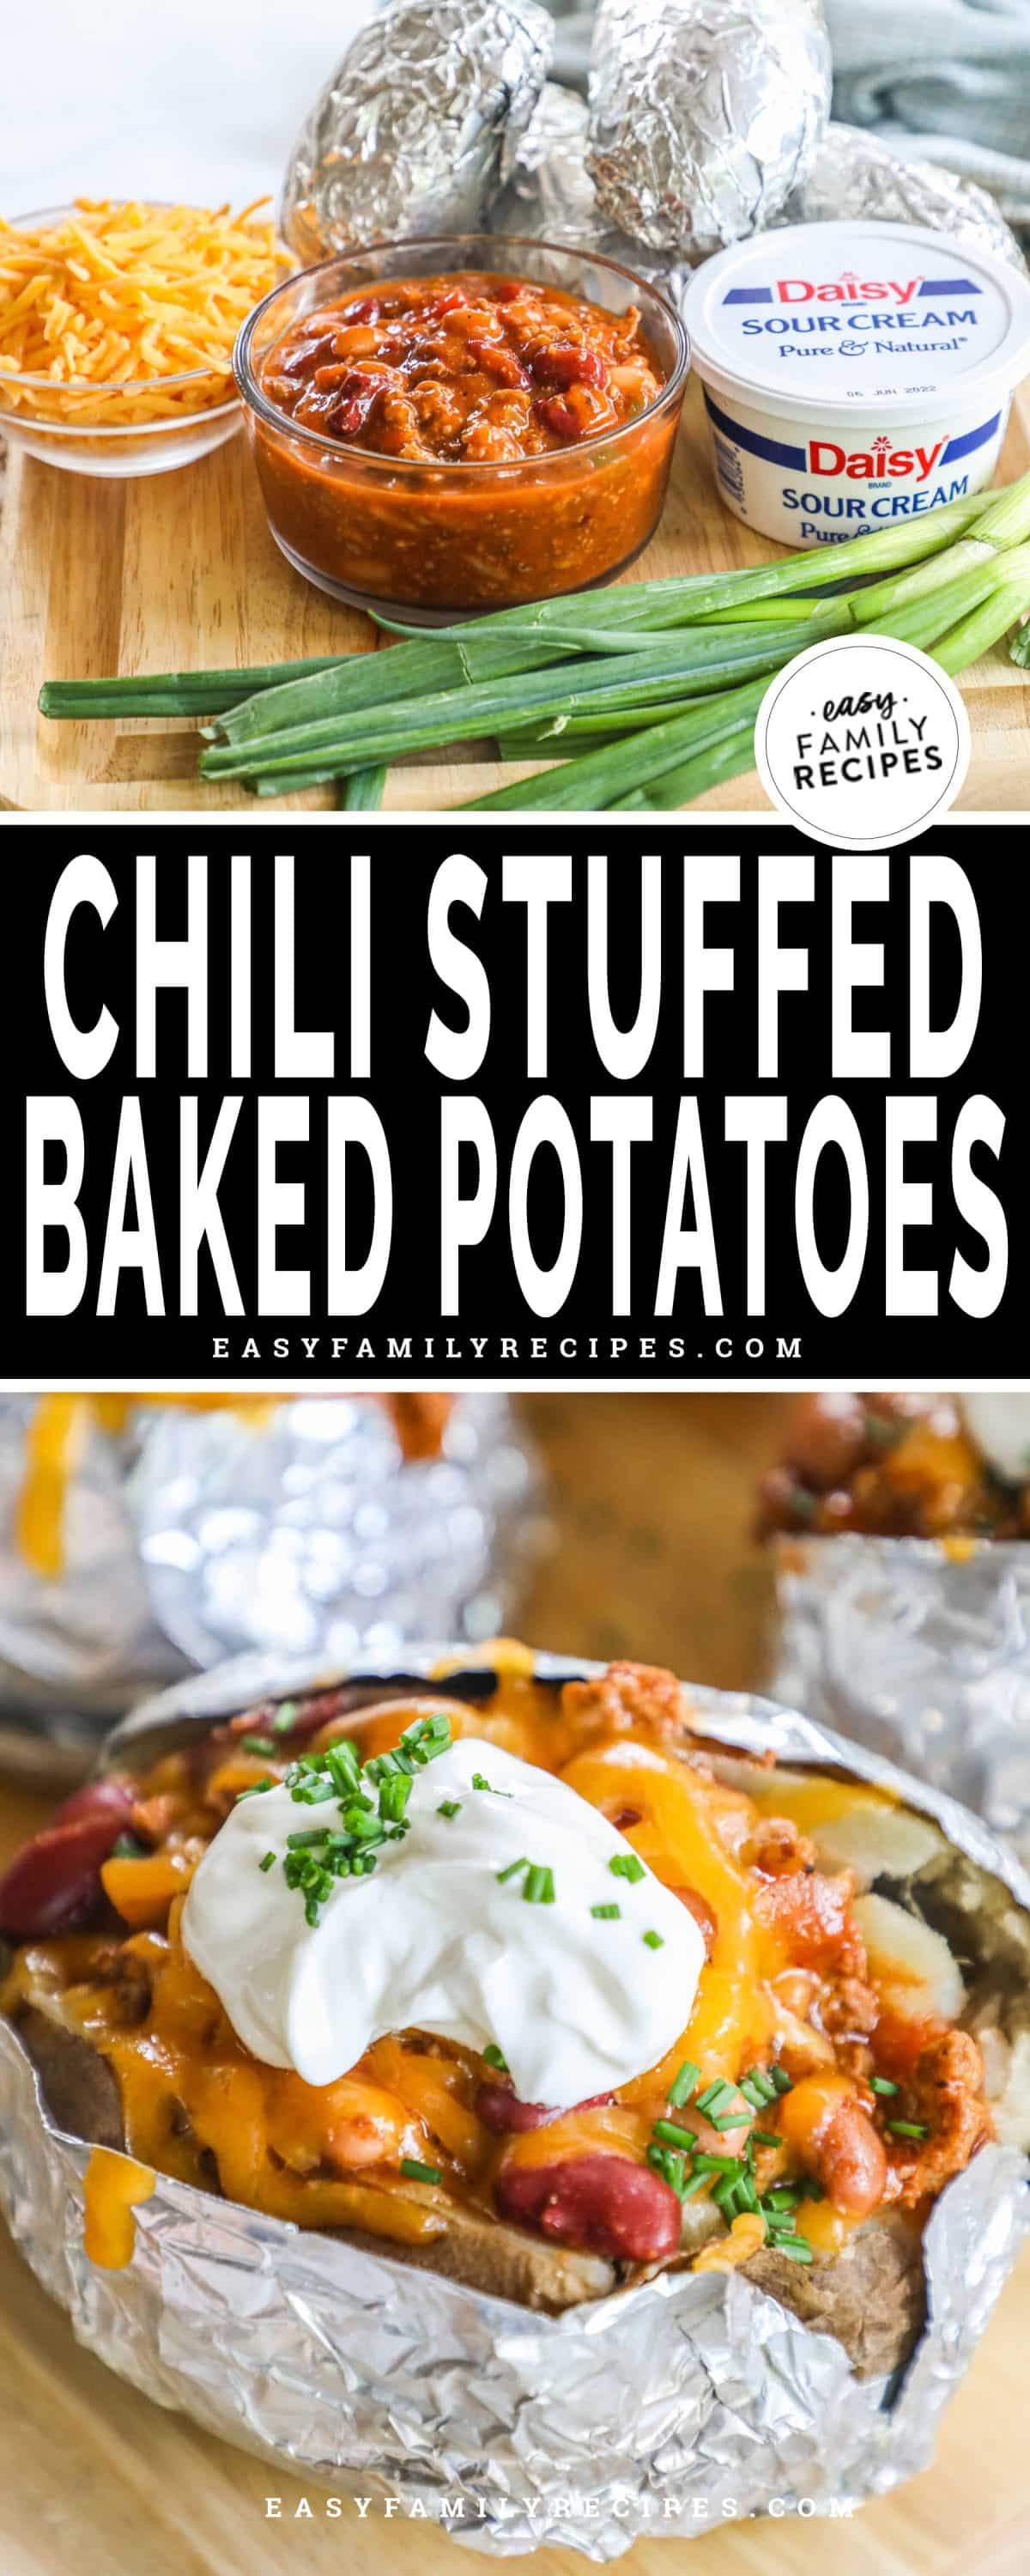 Chili stuffed baked potato with sour cream, cheese, and green onions and the ingredients to make stuffed baked potatoes.